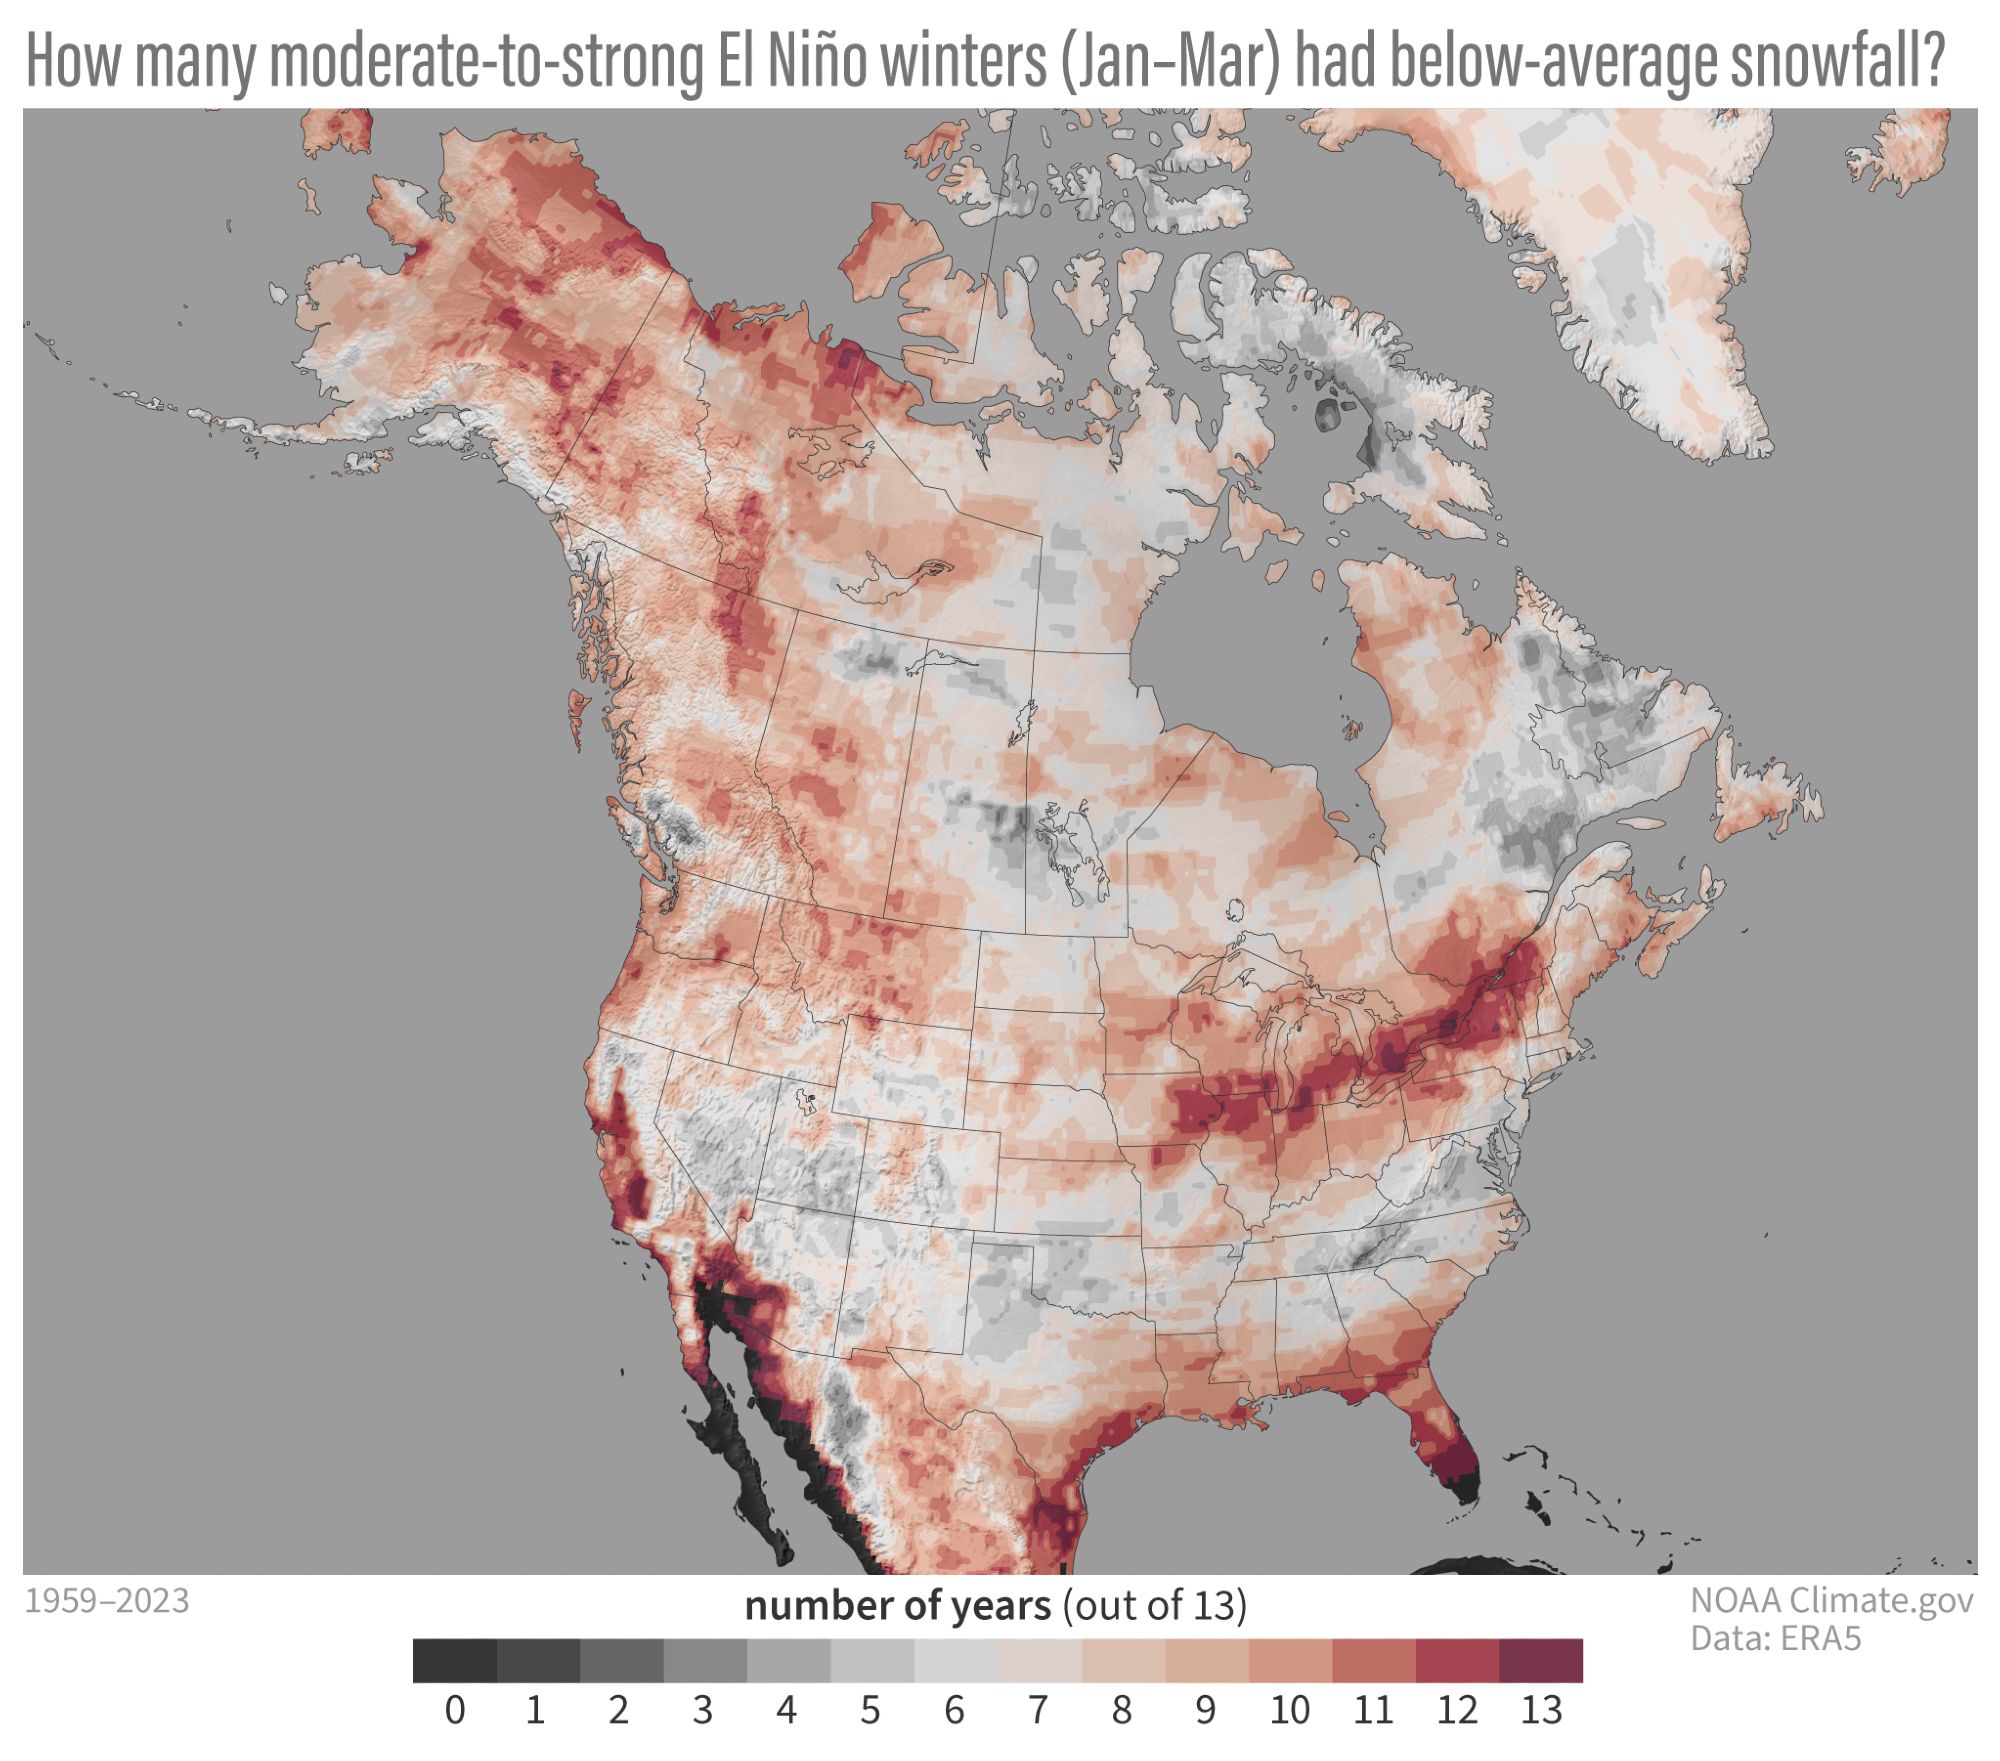 2023 El Niño winter: New maps reveal who could see more snowfall